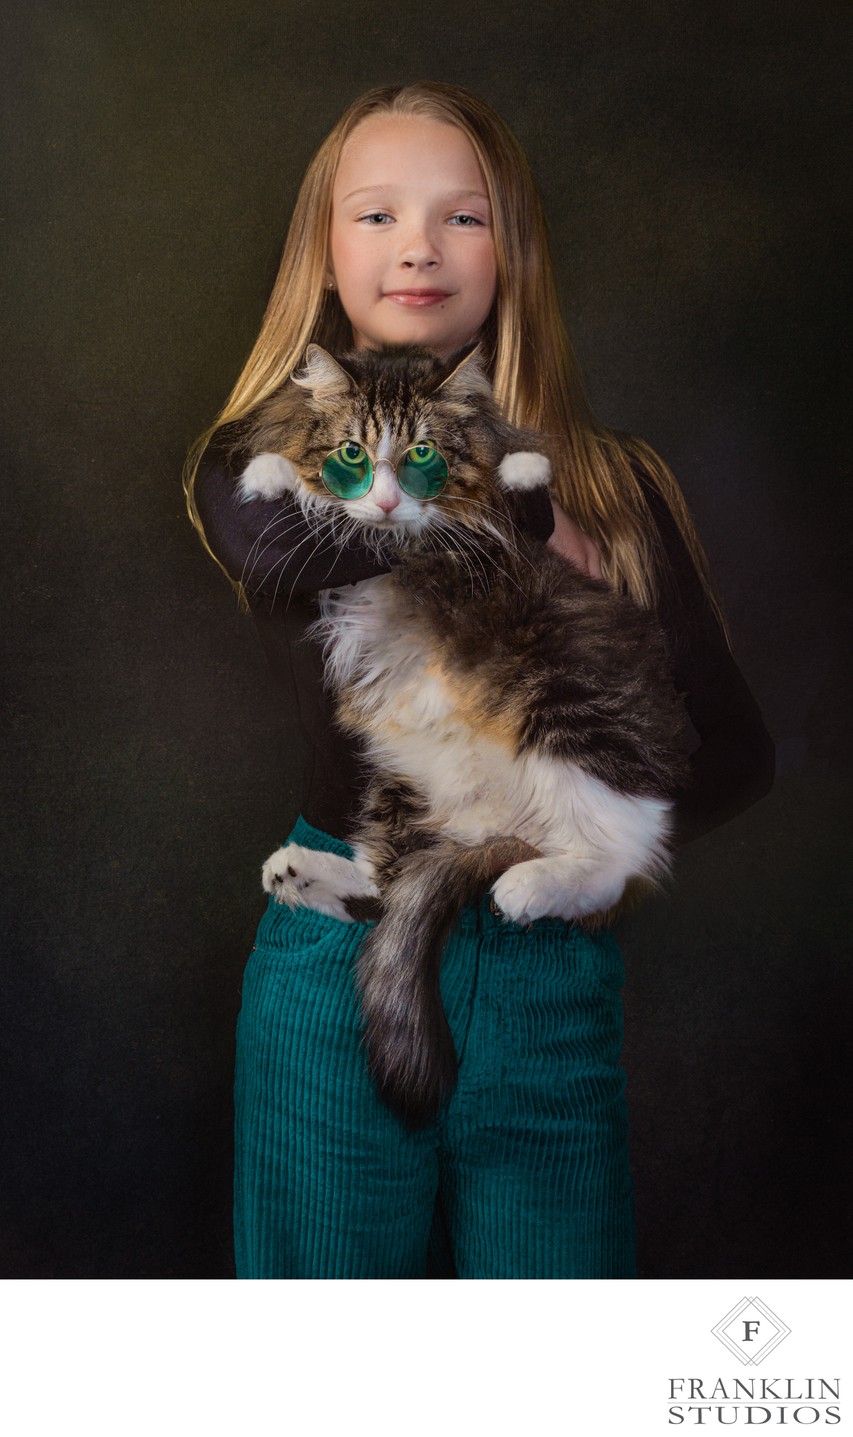 Photos of Kids with Pets